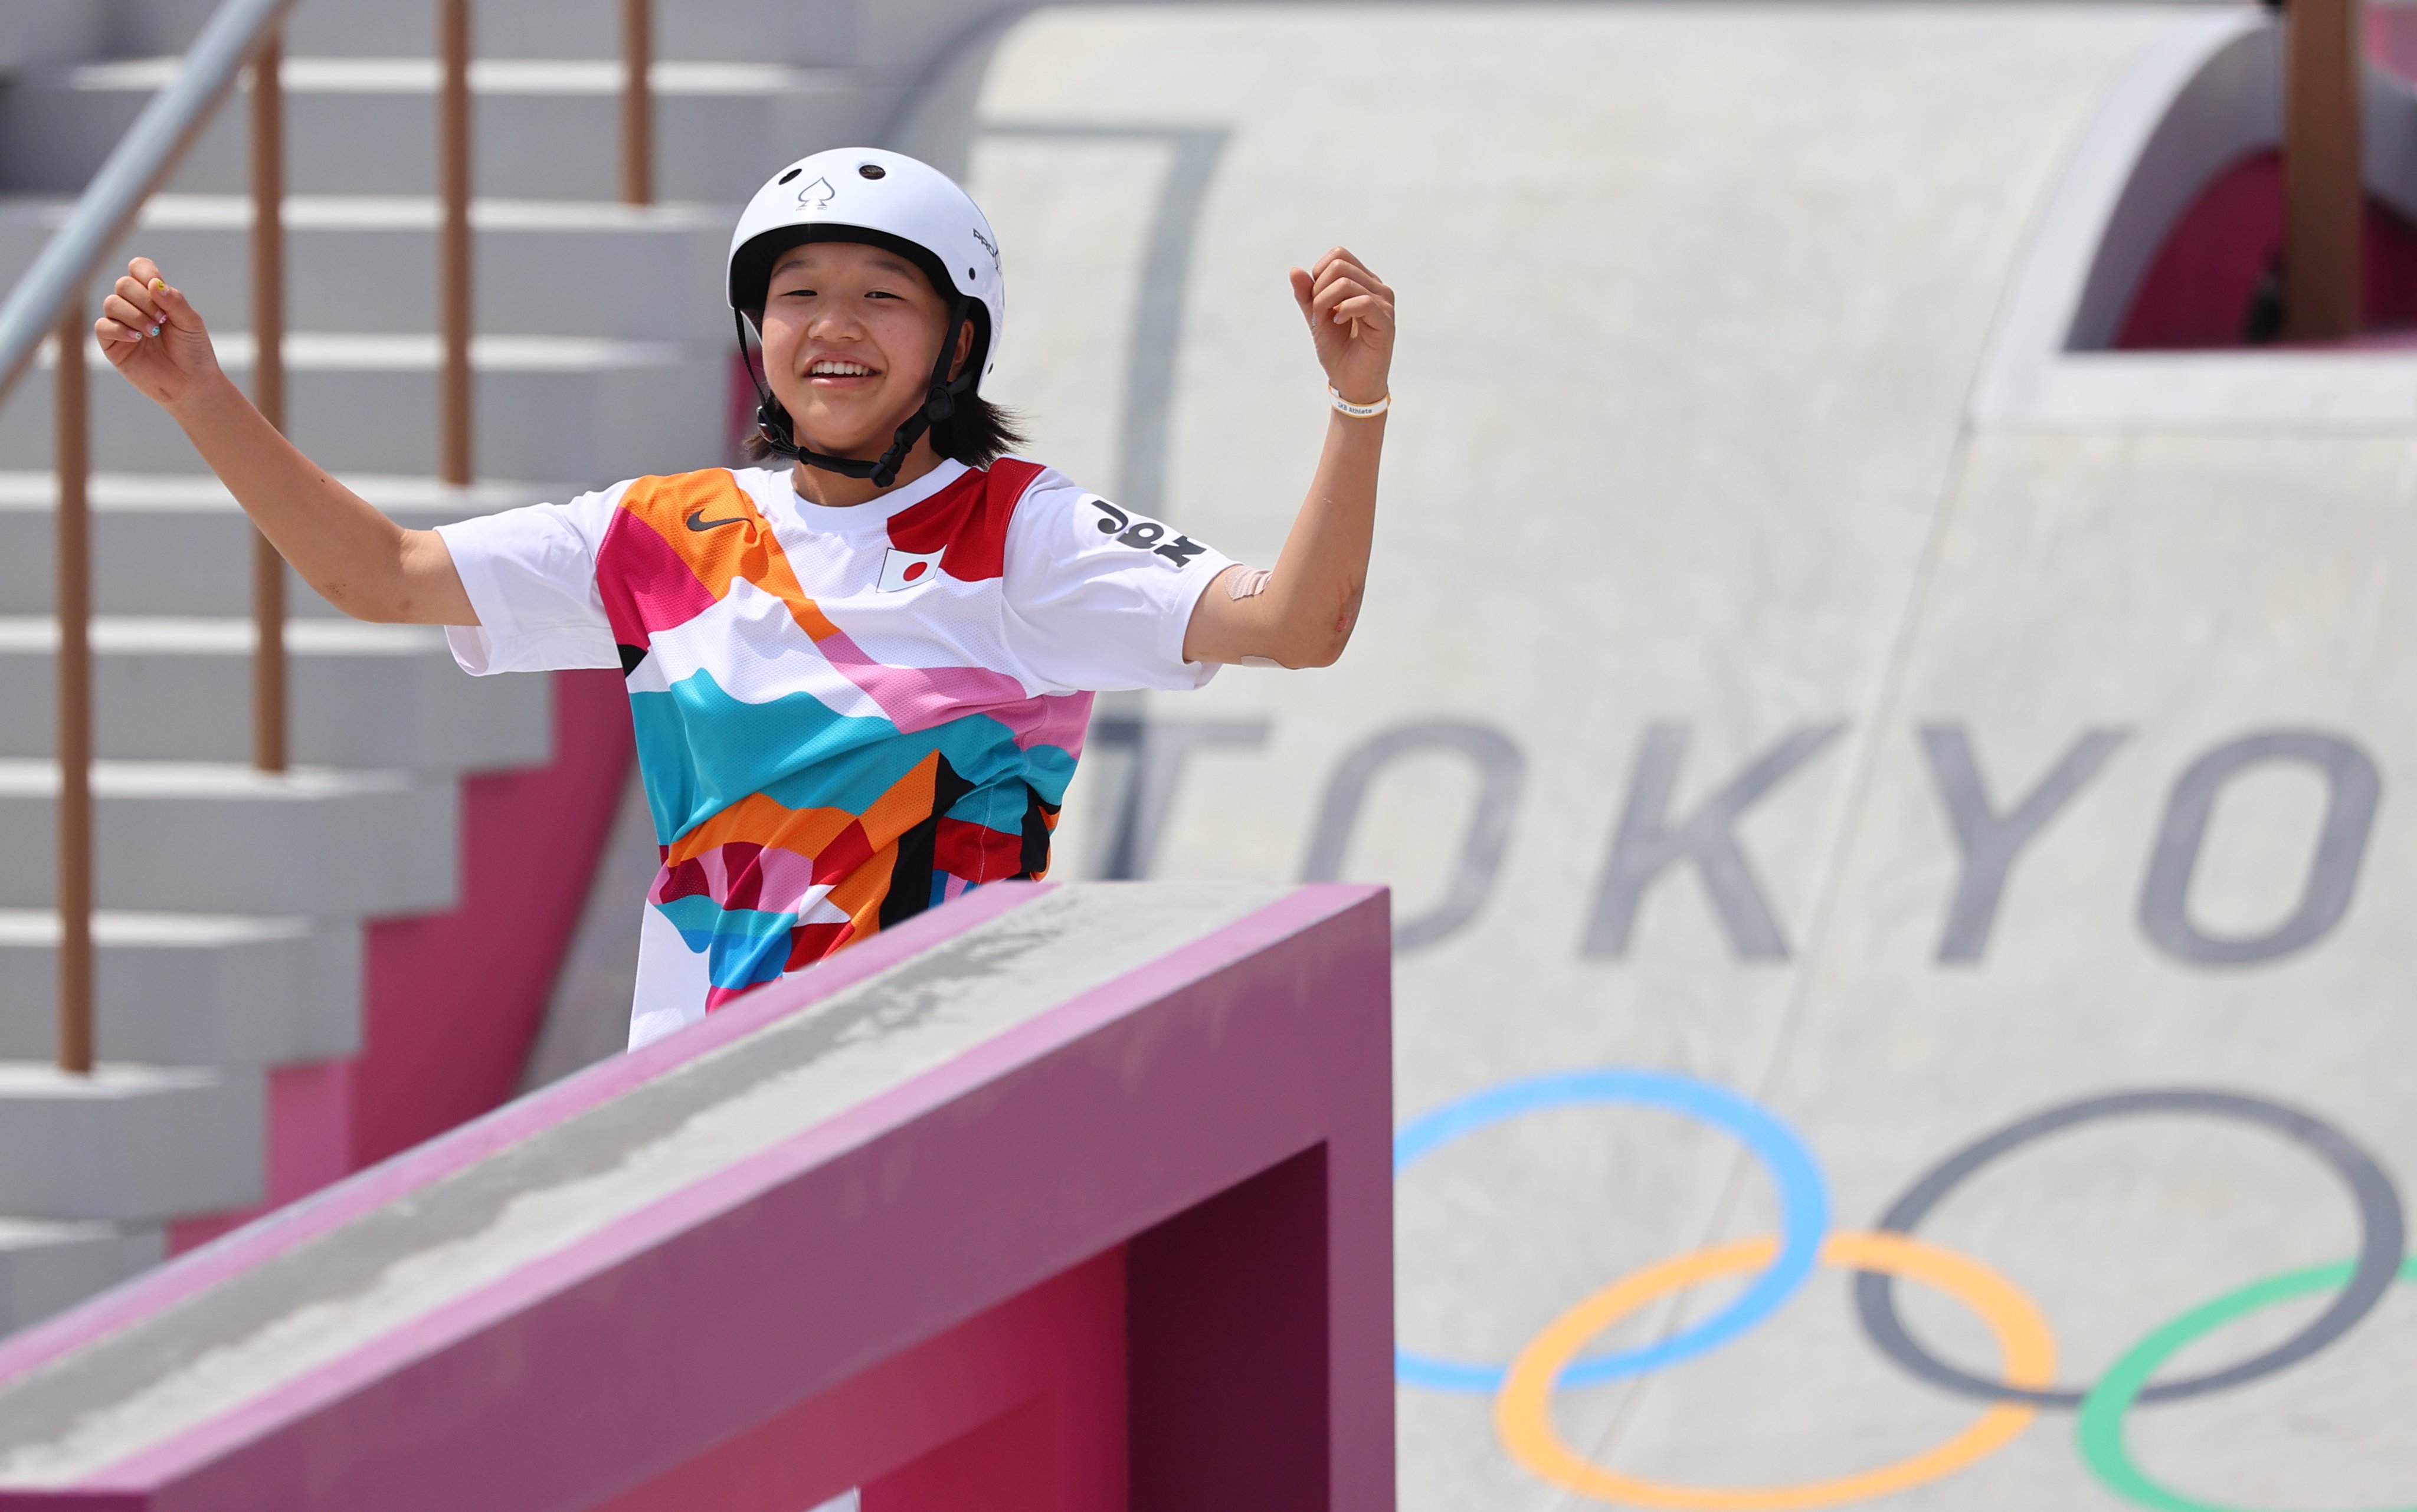 Standard Sport on Twitter: "Olympic champion at 13 YEARS OLD. Momiji Nishiya takes #GOLD in the women's street skateboarding. The #silver went to Rayssa Leal, who is also years old. LIVE: